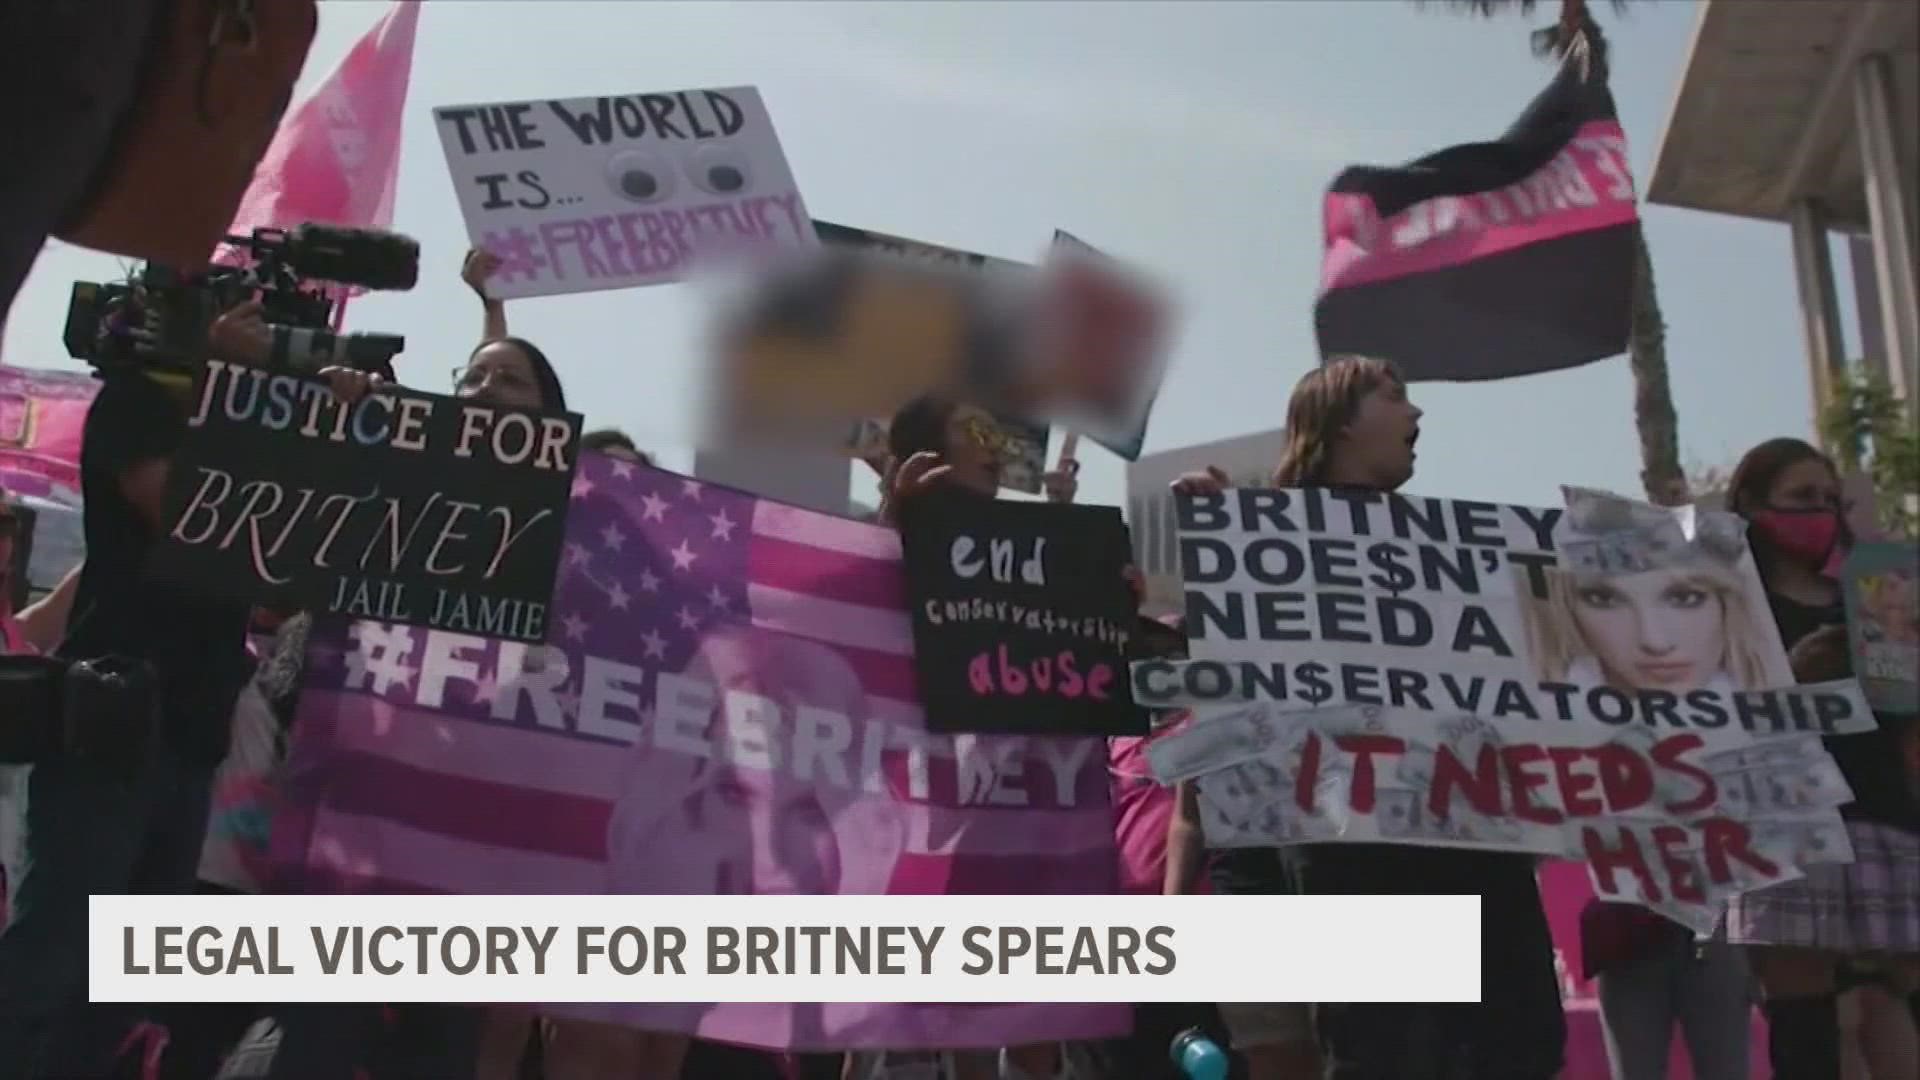 James Spears had been the primary controller of the conservatorship that controls Britney's life and money since 2008.